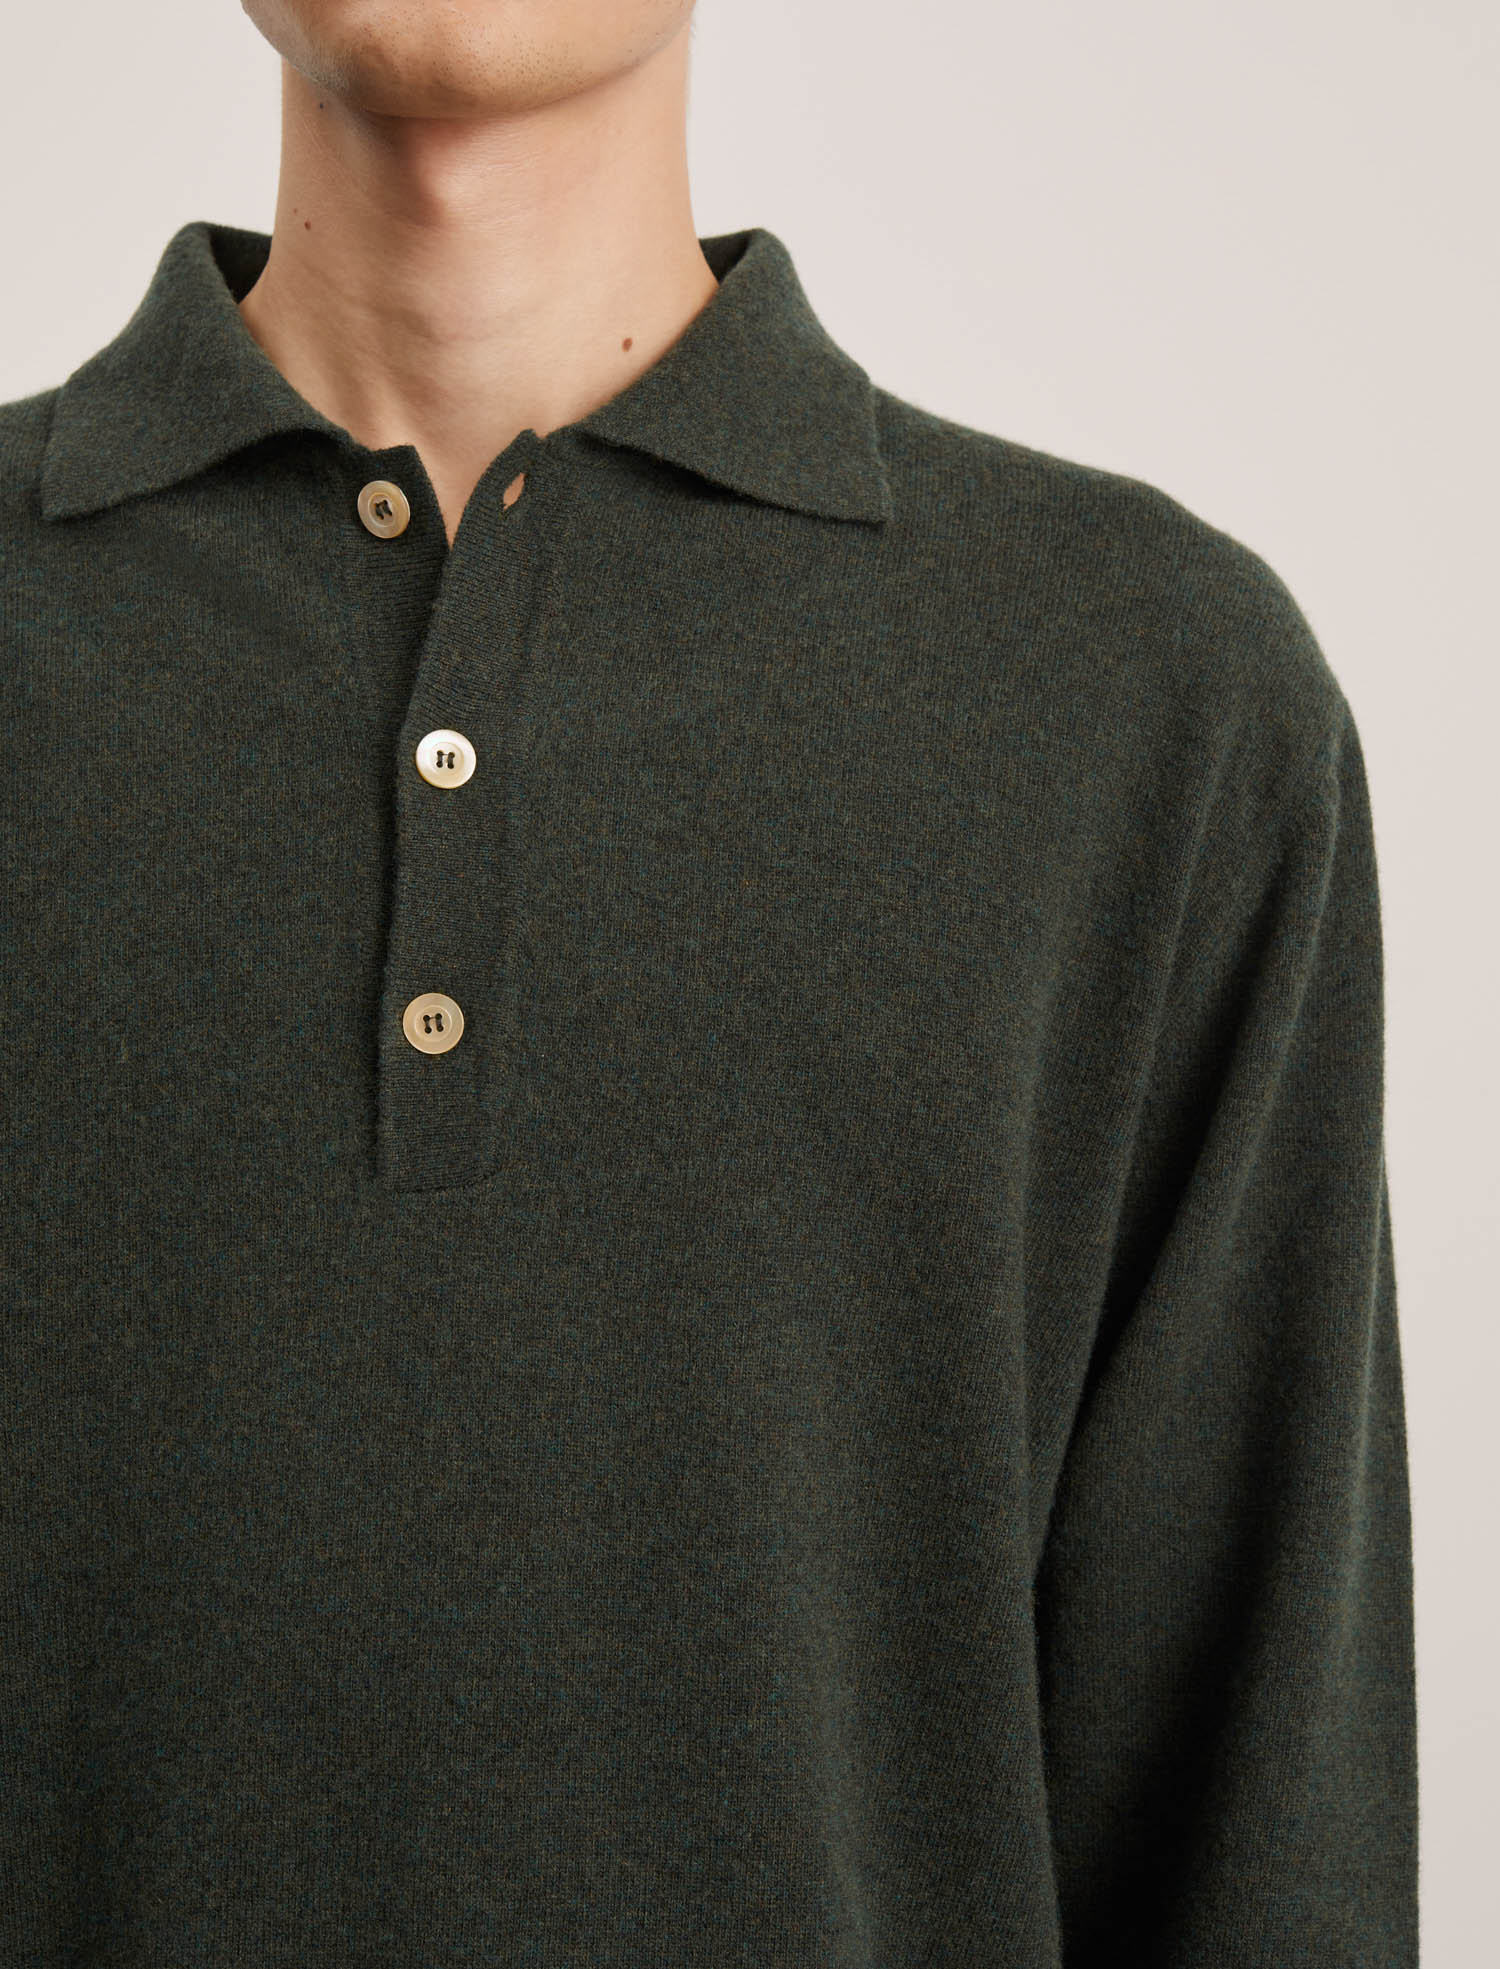 ANOTHER Polo Shirt 2.0, Bottle Green